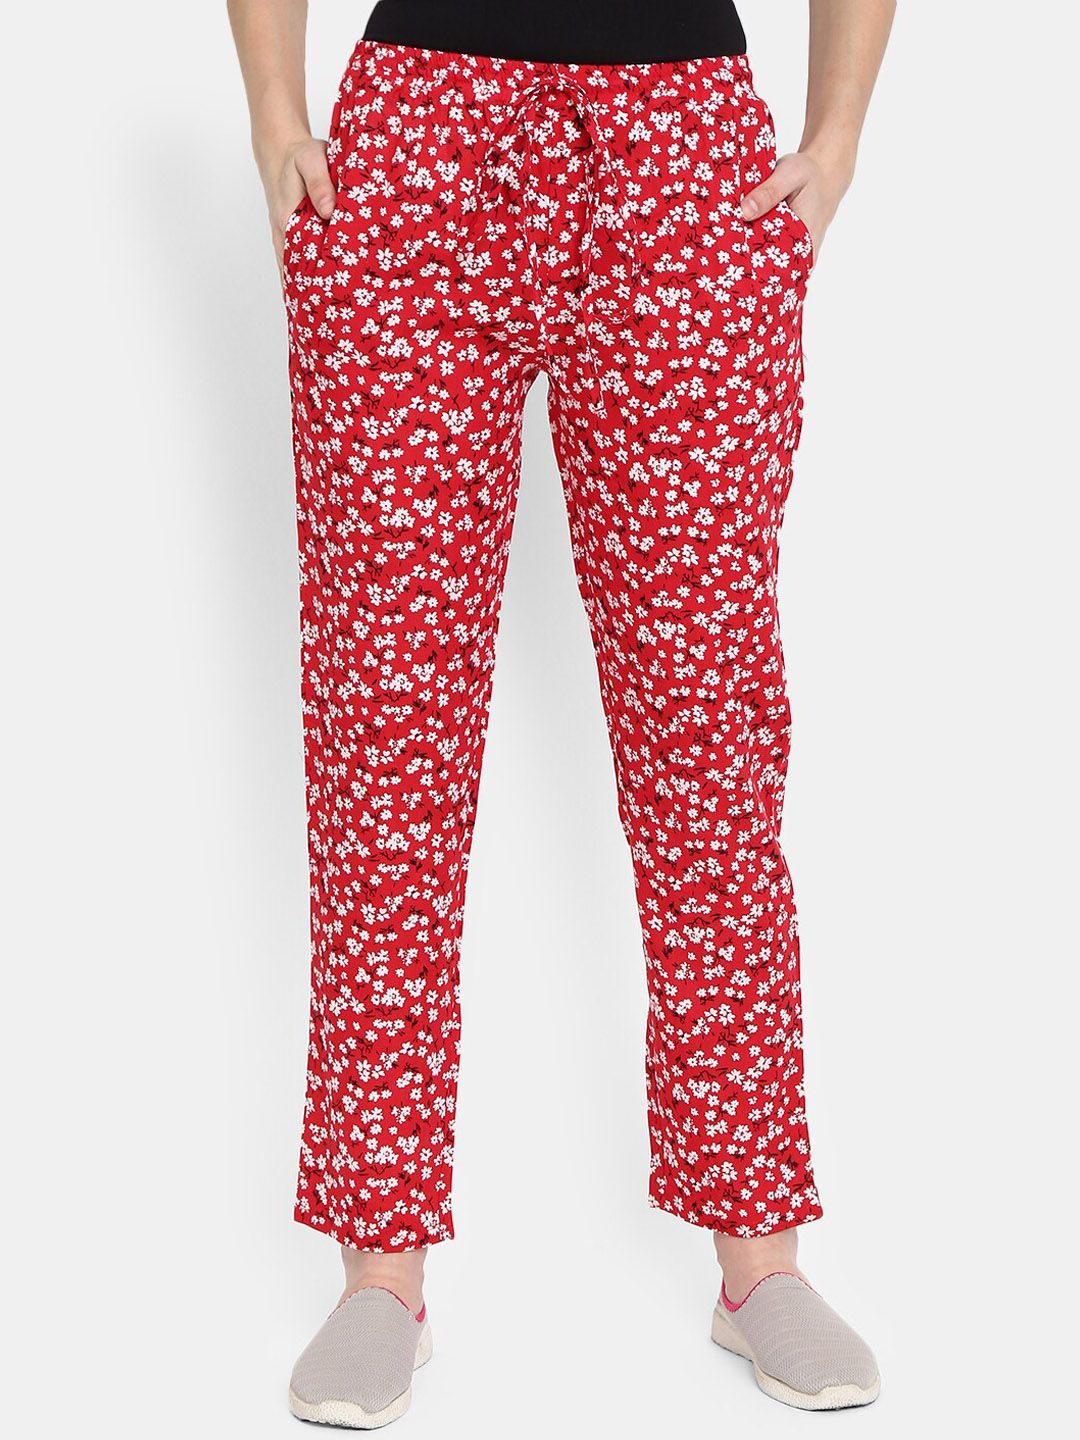 V-Mart Women Red & White Floral Printed Lounge Pants Price in India